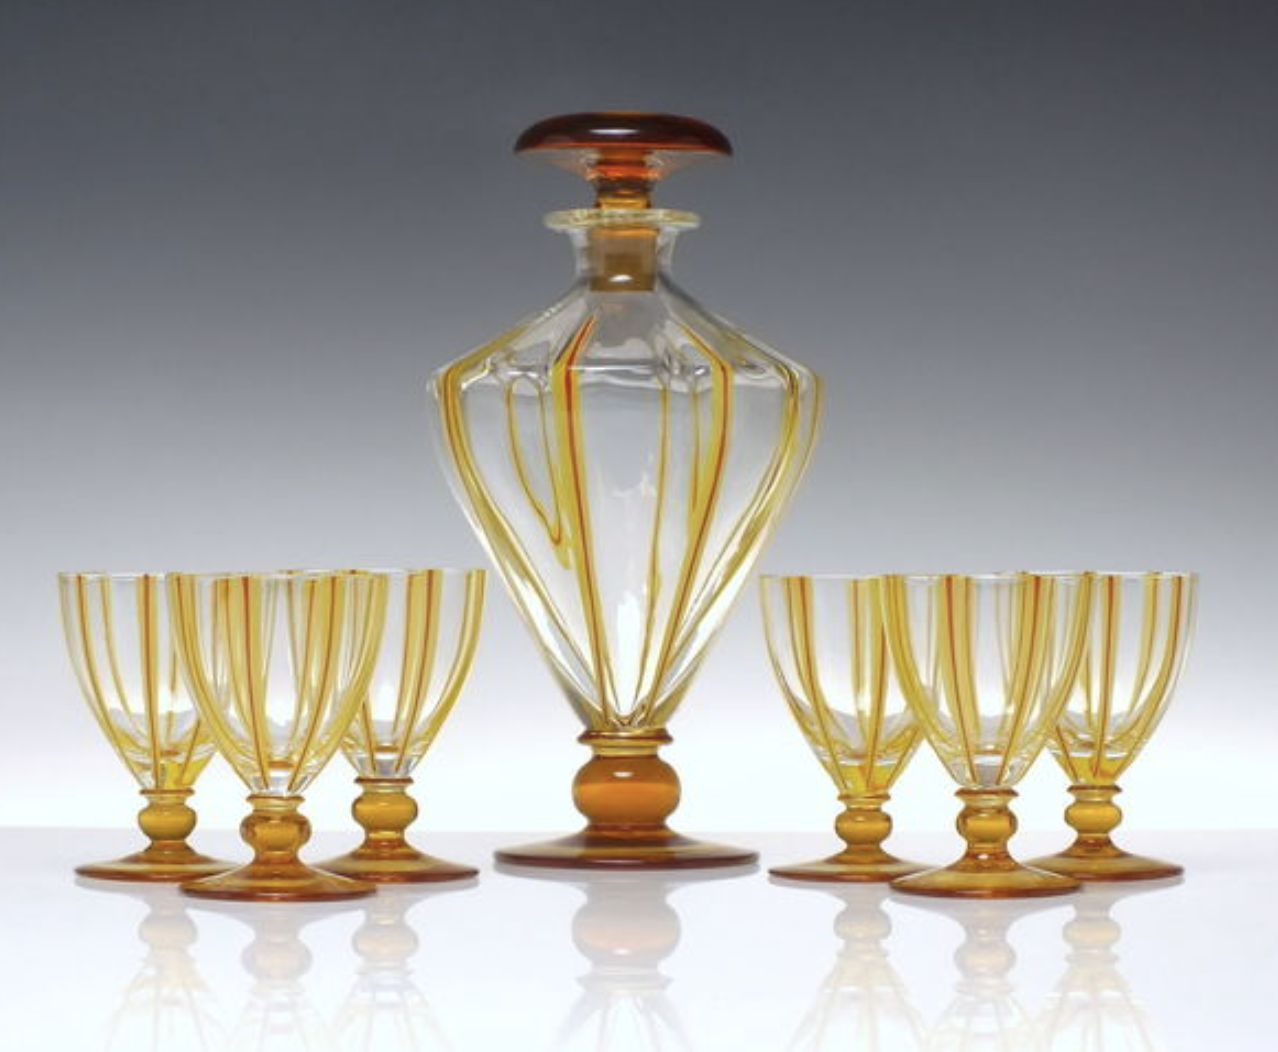 Art deco decanter and glasses